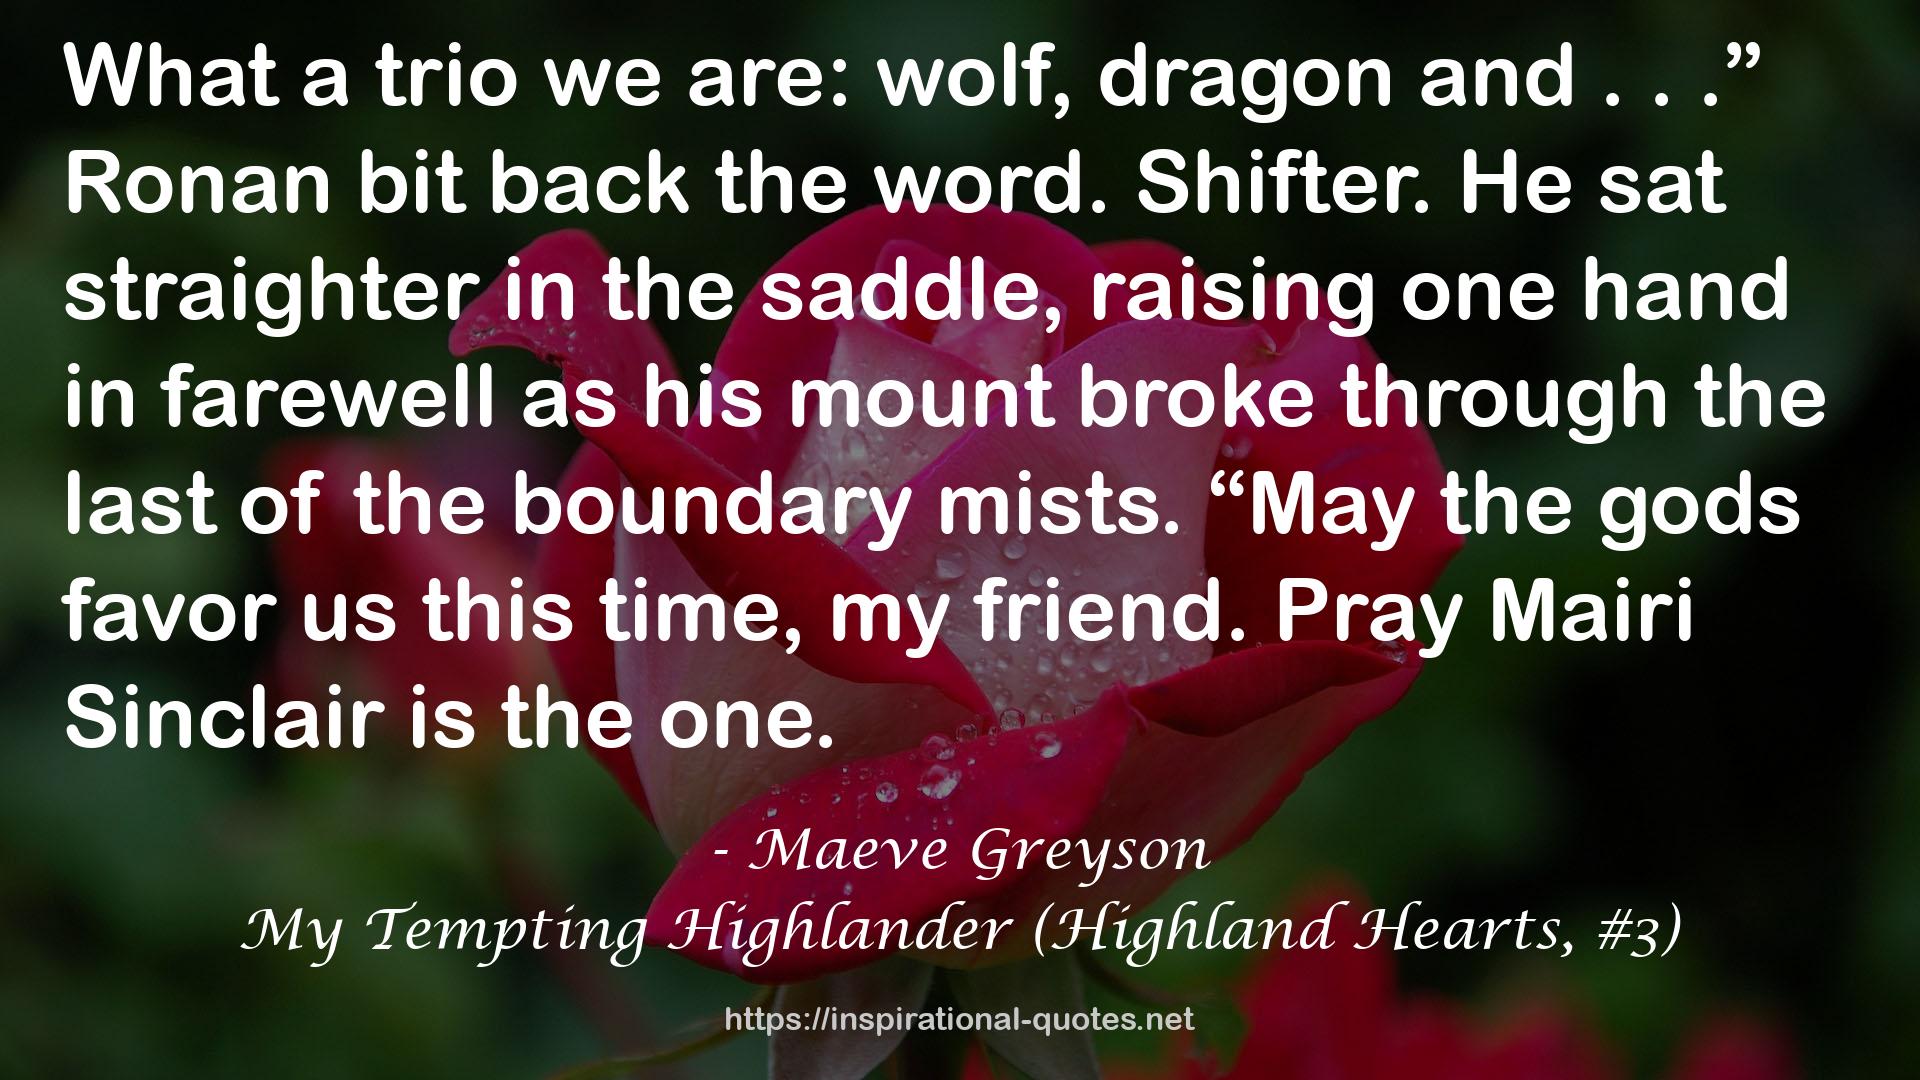 My Tempting Highlander (Highland Hearts, #3) QUOTES